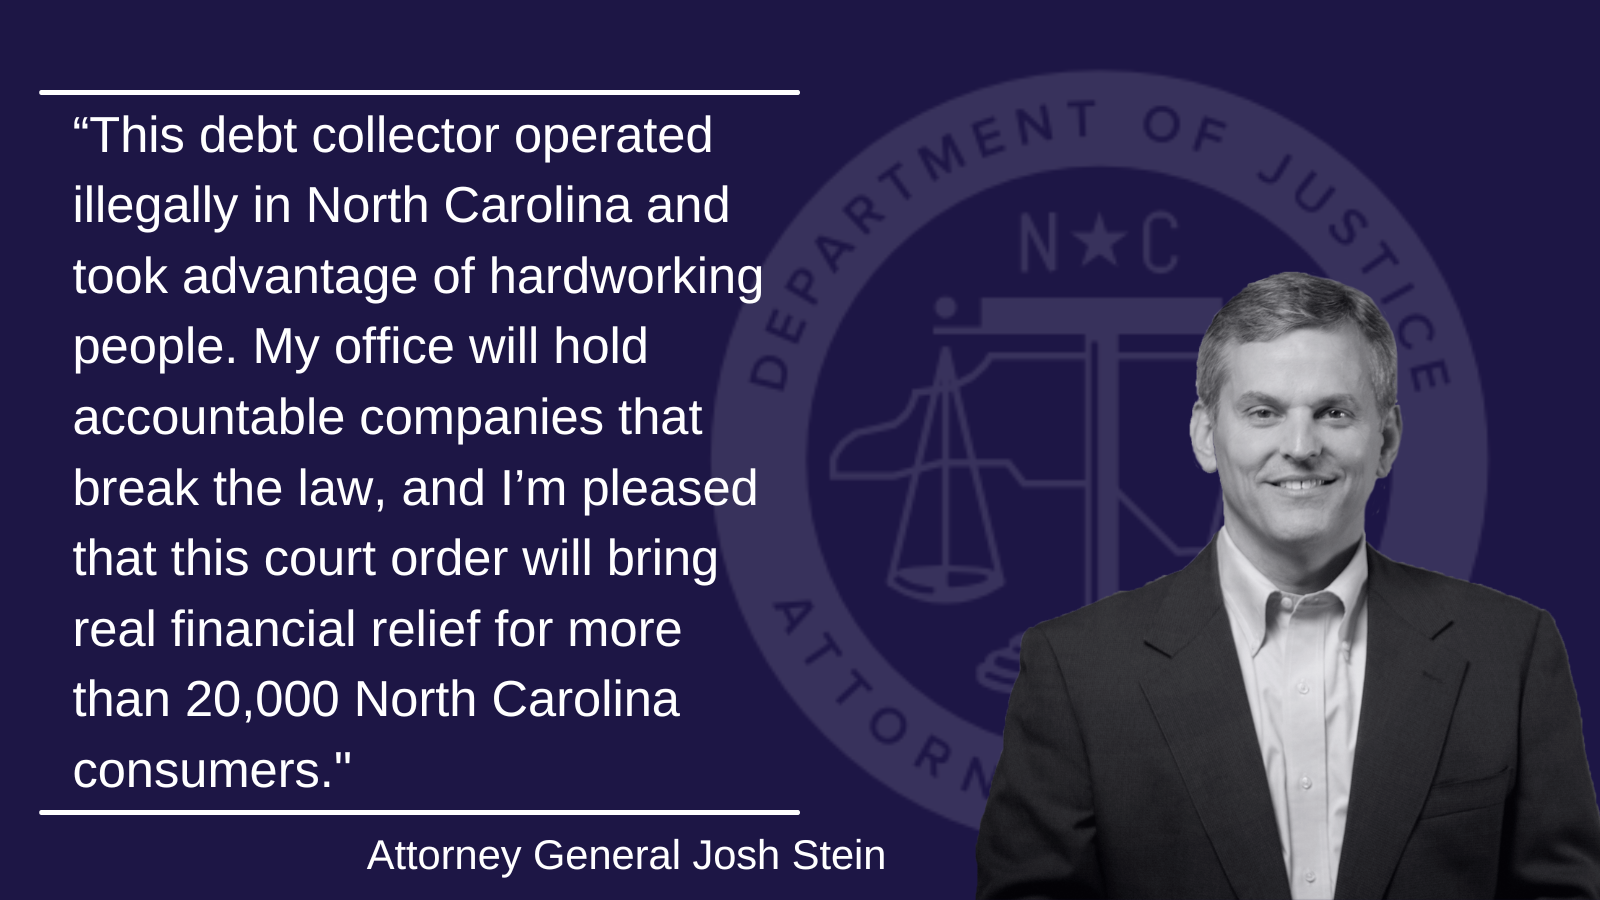 Attorney General Josh Stein Wins More Than $23 Million In Financial Relief From Debt Collector